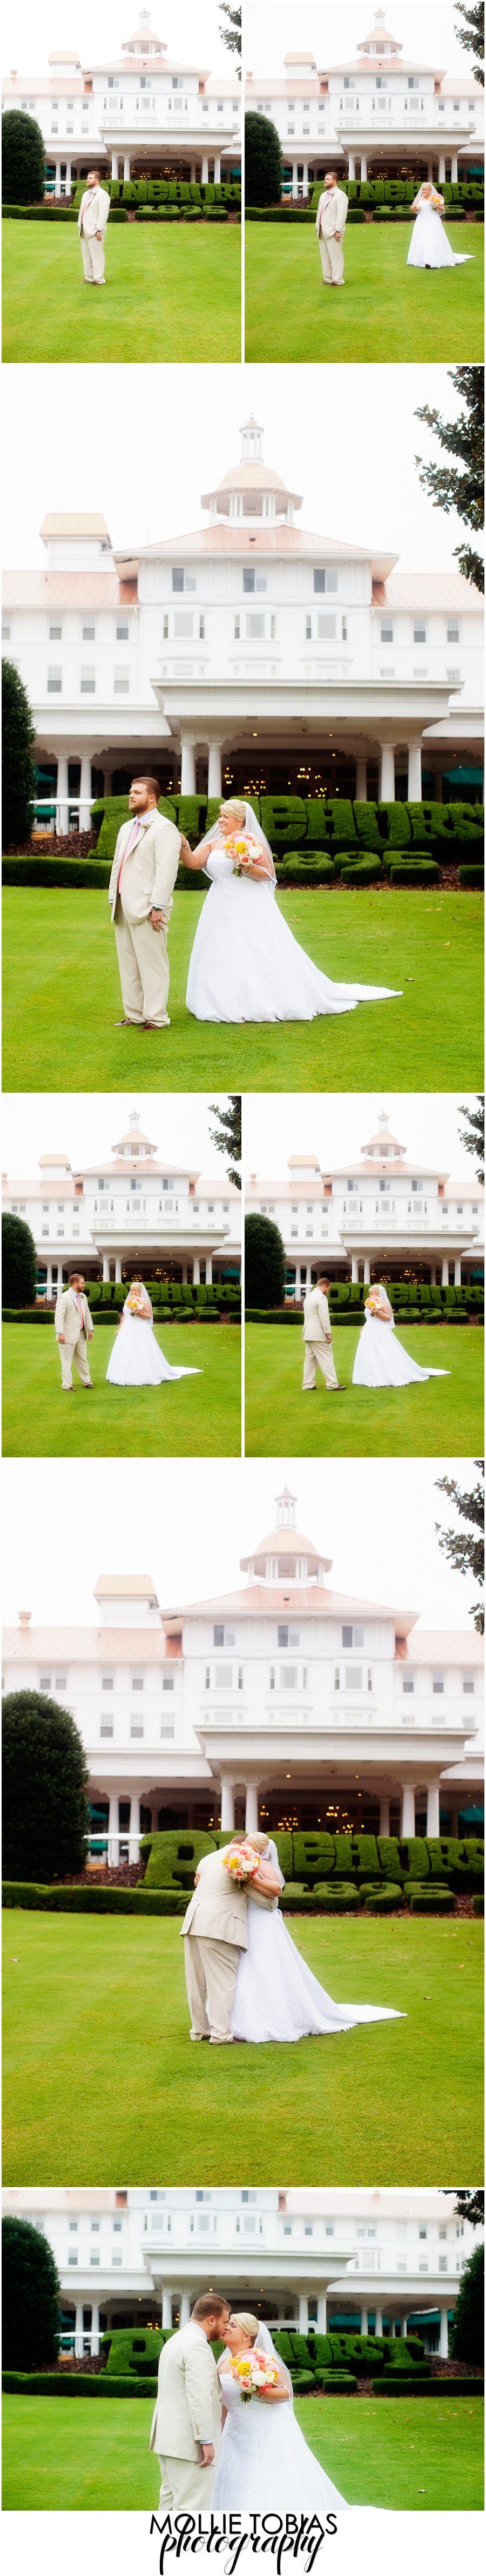 destination_wedding_photographer_chelsey_and_kyle_4